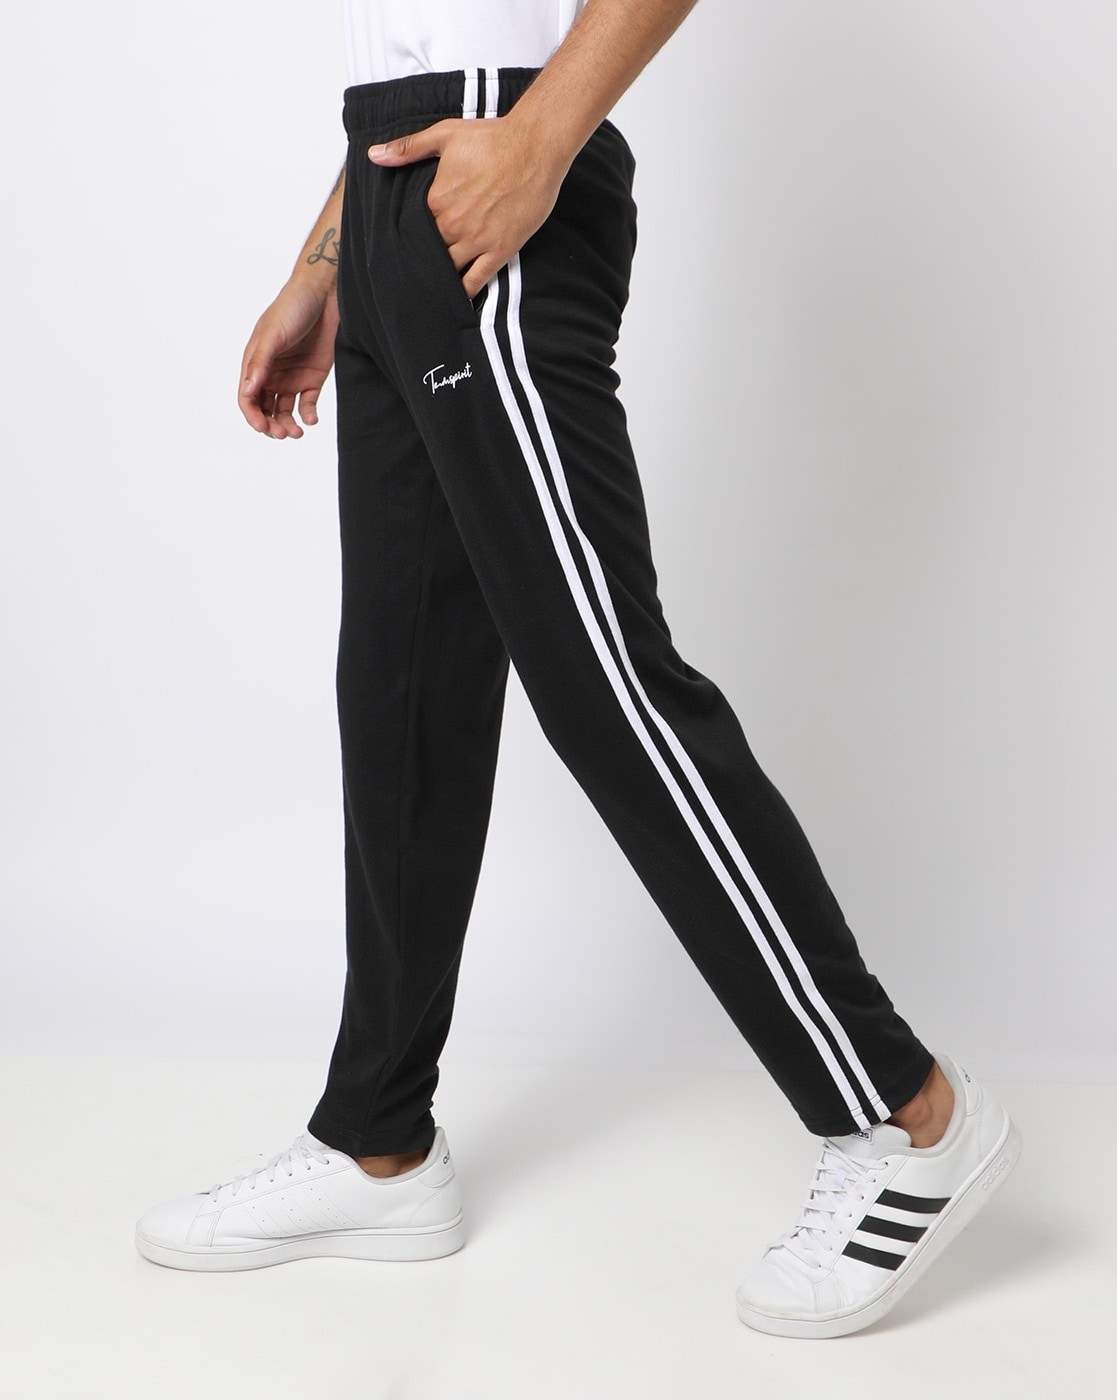 Colorblock Striped Hip Hop Track Pants For Men And Women Loose Fit, Zipper  Closure, Sweat Wicking, Slim Fit Trouser Pants For Men 210715 From Bai03,  $28.14 | DHgate.Com